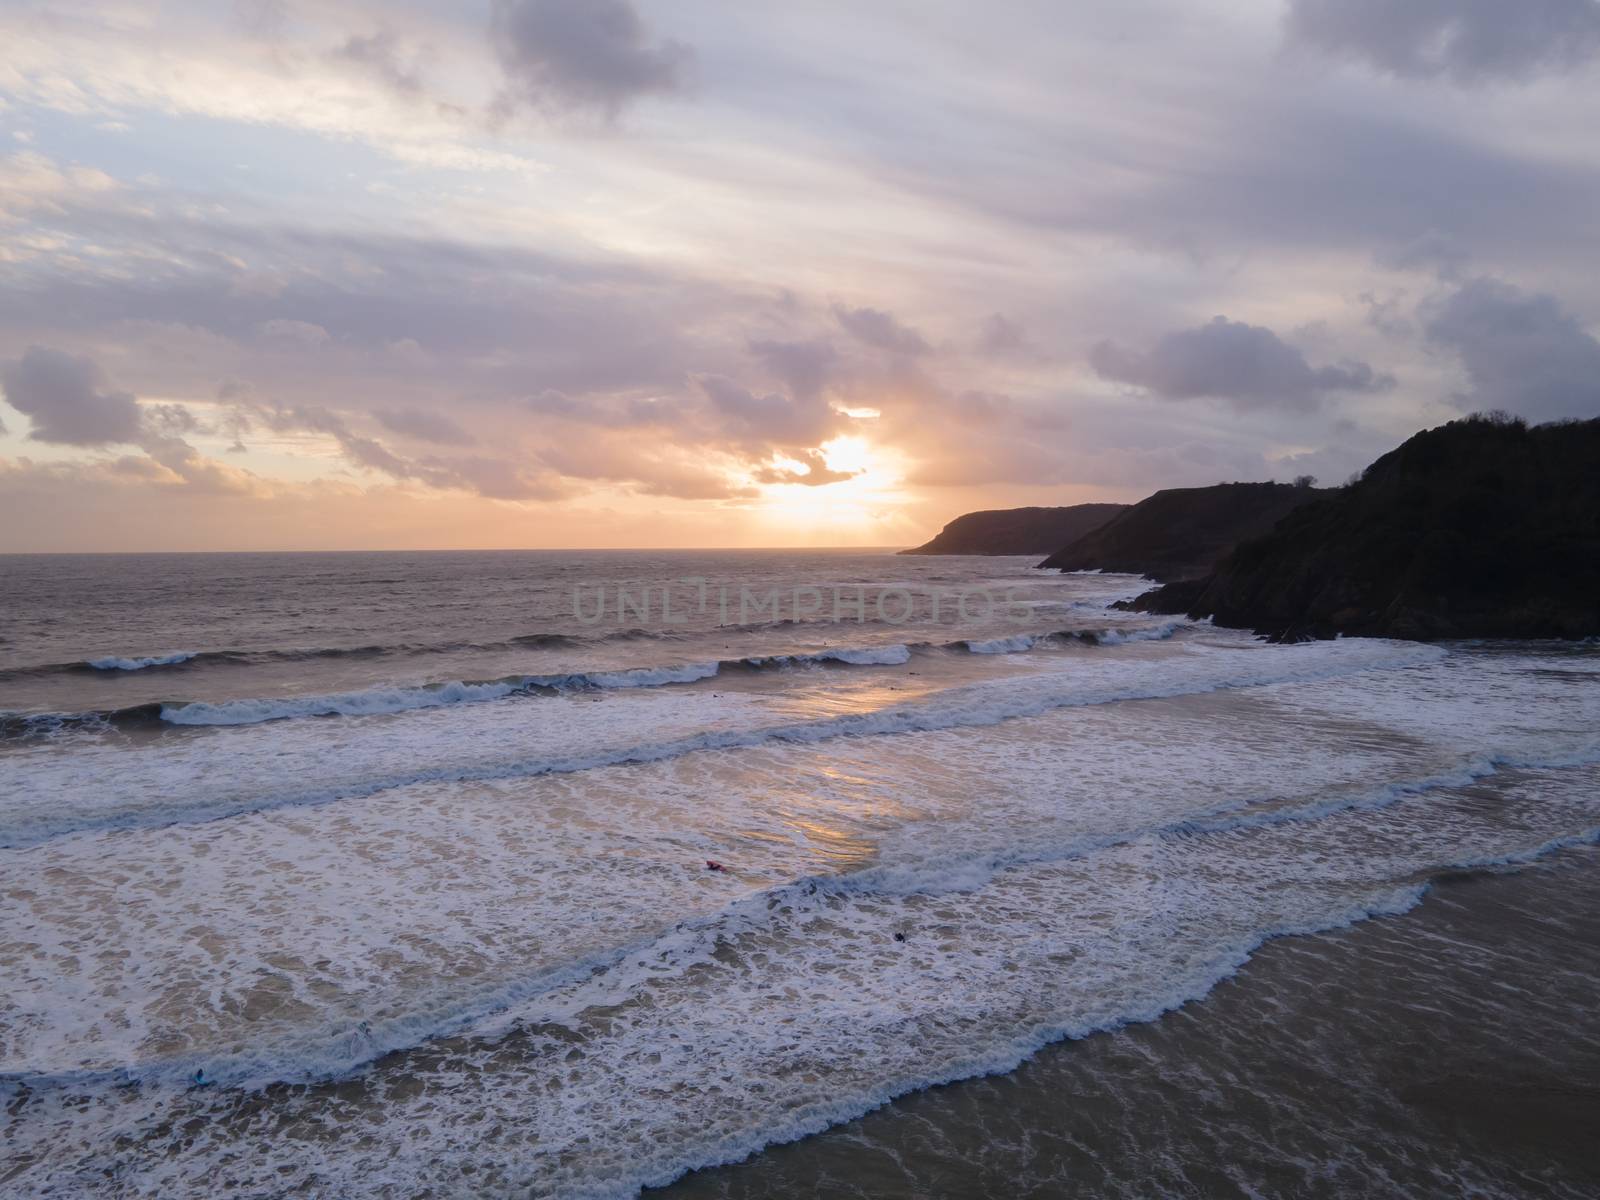 A Stunning Coastal Sunset Full Of Colour Overlooking the Sea At Caswell Bay in Gower, Wales UK